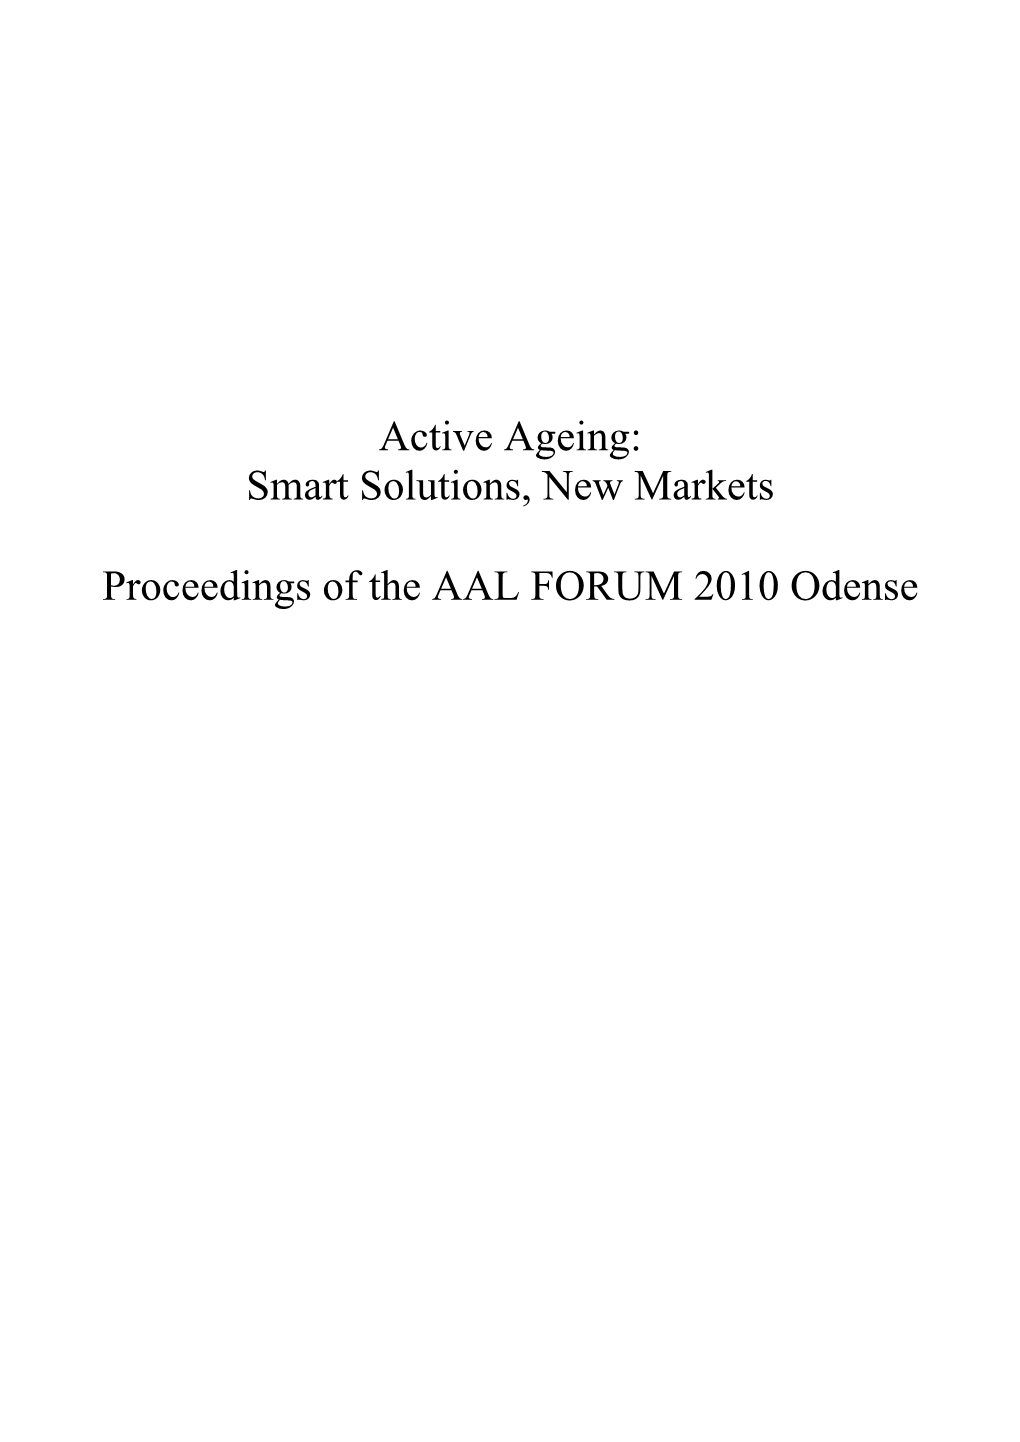 Active Ageing: Smart Solutions, New Markets Proceedings of the AAL